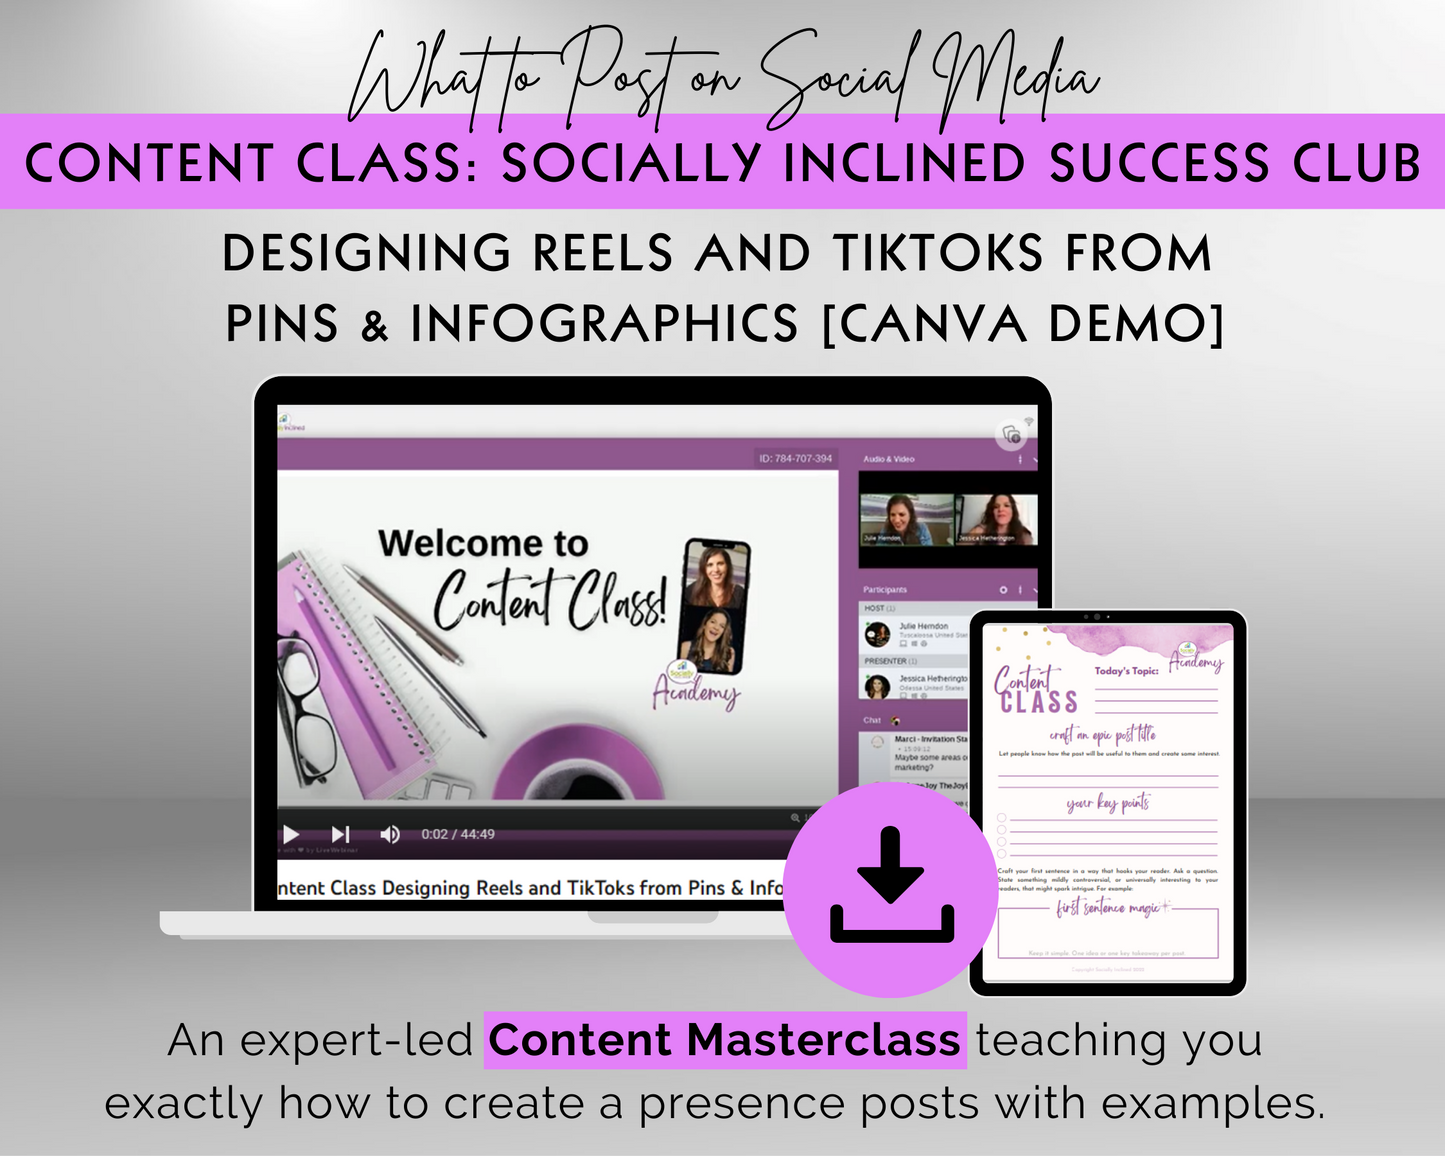 Get Socially Inclined's Content Class - Designing Reels and TikToks from Pins & Infographics [Canva Demo] Masterclass features white pot design tutorials for creating Reels and TikToks.